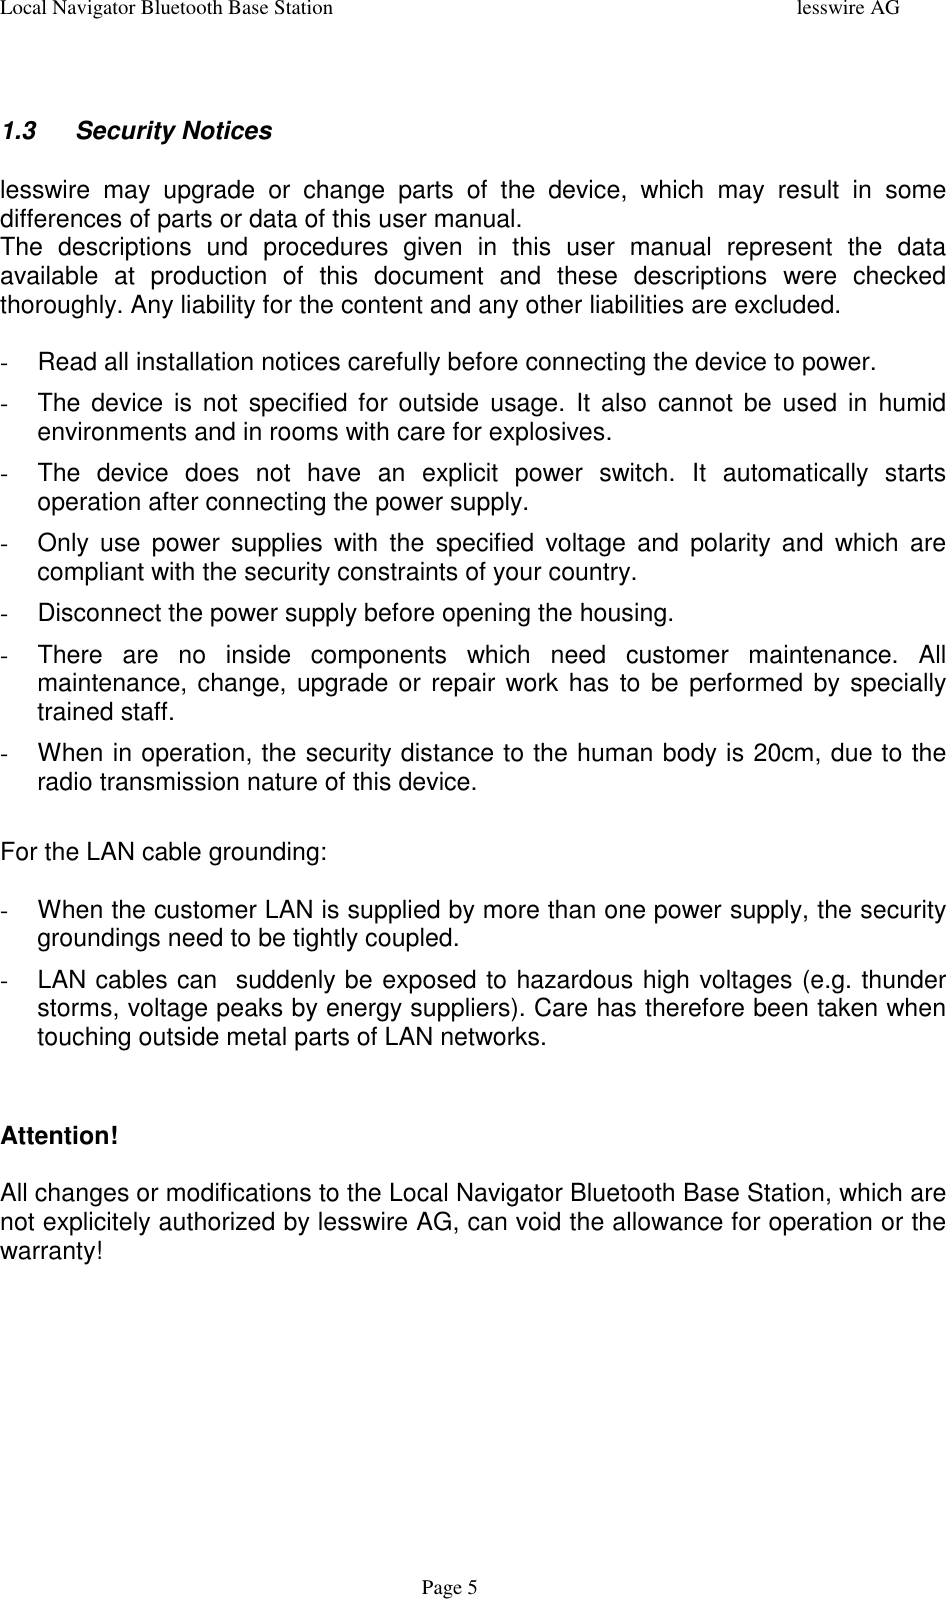 Local Navigator Bluetooth Base Station lesswire AGPage 51.3 Security Noticeslesswire may upgrade or change parts of the device, which may result in somedifferences of parts or data of this user manual.The descriptions und procedures given in this user manual represent the dataavailable at production of this document and these descriptions were checkedthoroughly. Any liability for the content and any other liabilities are excluded.-  Read all installation notices carefully before connecting the device to power.-  The device is not specified for outside usage. It also cannot be used in humidenvironments and in rooms with care for explosives.-  The device does not have an explicit power switch. It automatically startsoperation after connecting the power supply.-  Only use power supplies with the specified voltage and polarity and which arecompliant with the security constraints of your country.-  Disconnect the power supply before opening the housing.-  There are no inside components which need customer maintenance. Allmaintenance, change, upgrade or repair work has to be performed by speciallytrained staff.-  When in operation, the security distance to the human body is 20cm, due to theradio transmission nature of this device.For the LAN cable grounding:-  When the customer LAN is supplied by more than one power supply, the securitygroundings need to be tightly coupled.-  LAN cables can  suddenly be exposed to hazardous high voltages (e.g. thunderstorms, voltage peaks by energy suppliers). Care has therefore been taken whentouching outside metal parts of LAN networks.Attention!All changes or modifications to the Local Navigator Bluetooth Base Station, which arenot explicitely authorized by lesswire AG, can void the allowance for operation or thewarranty!